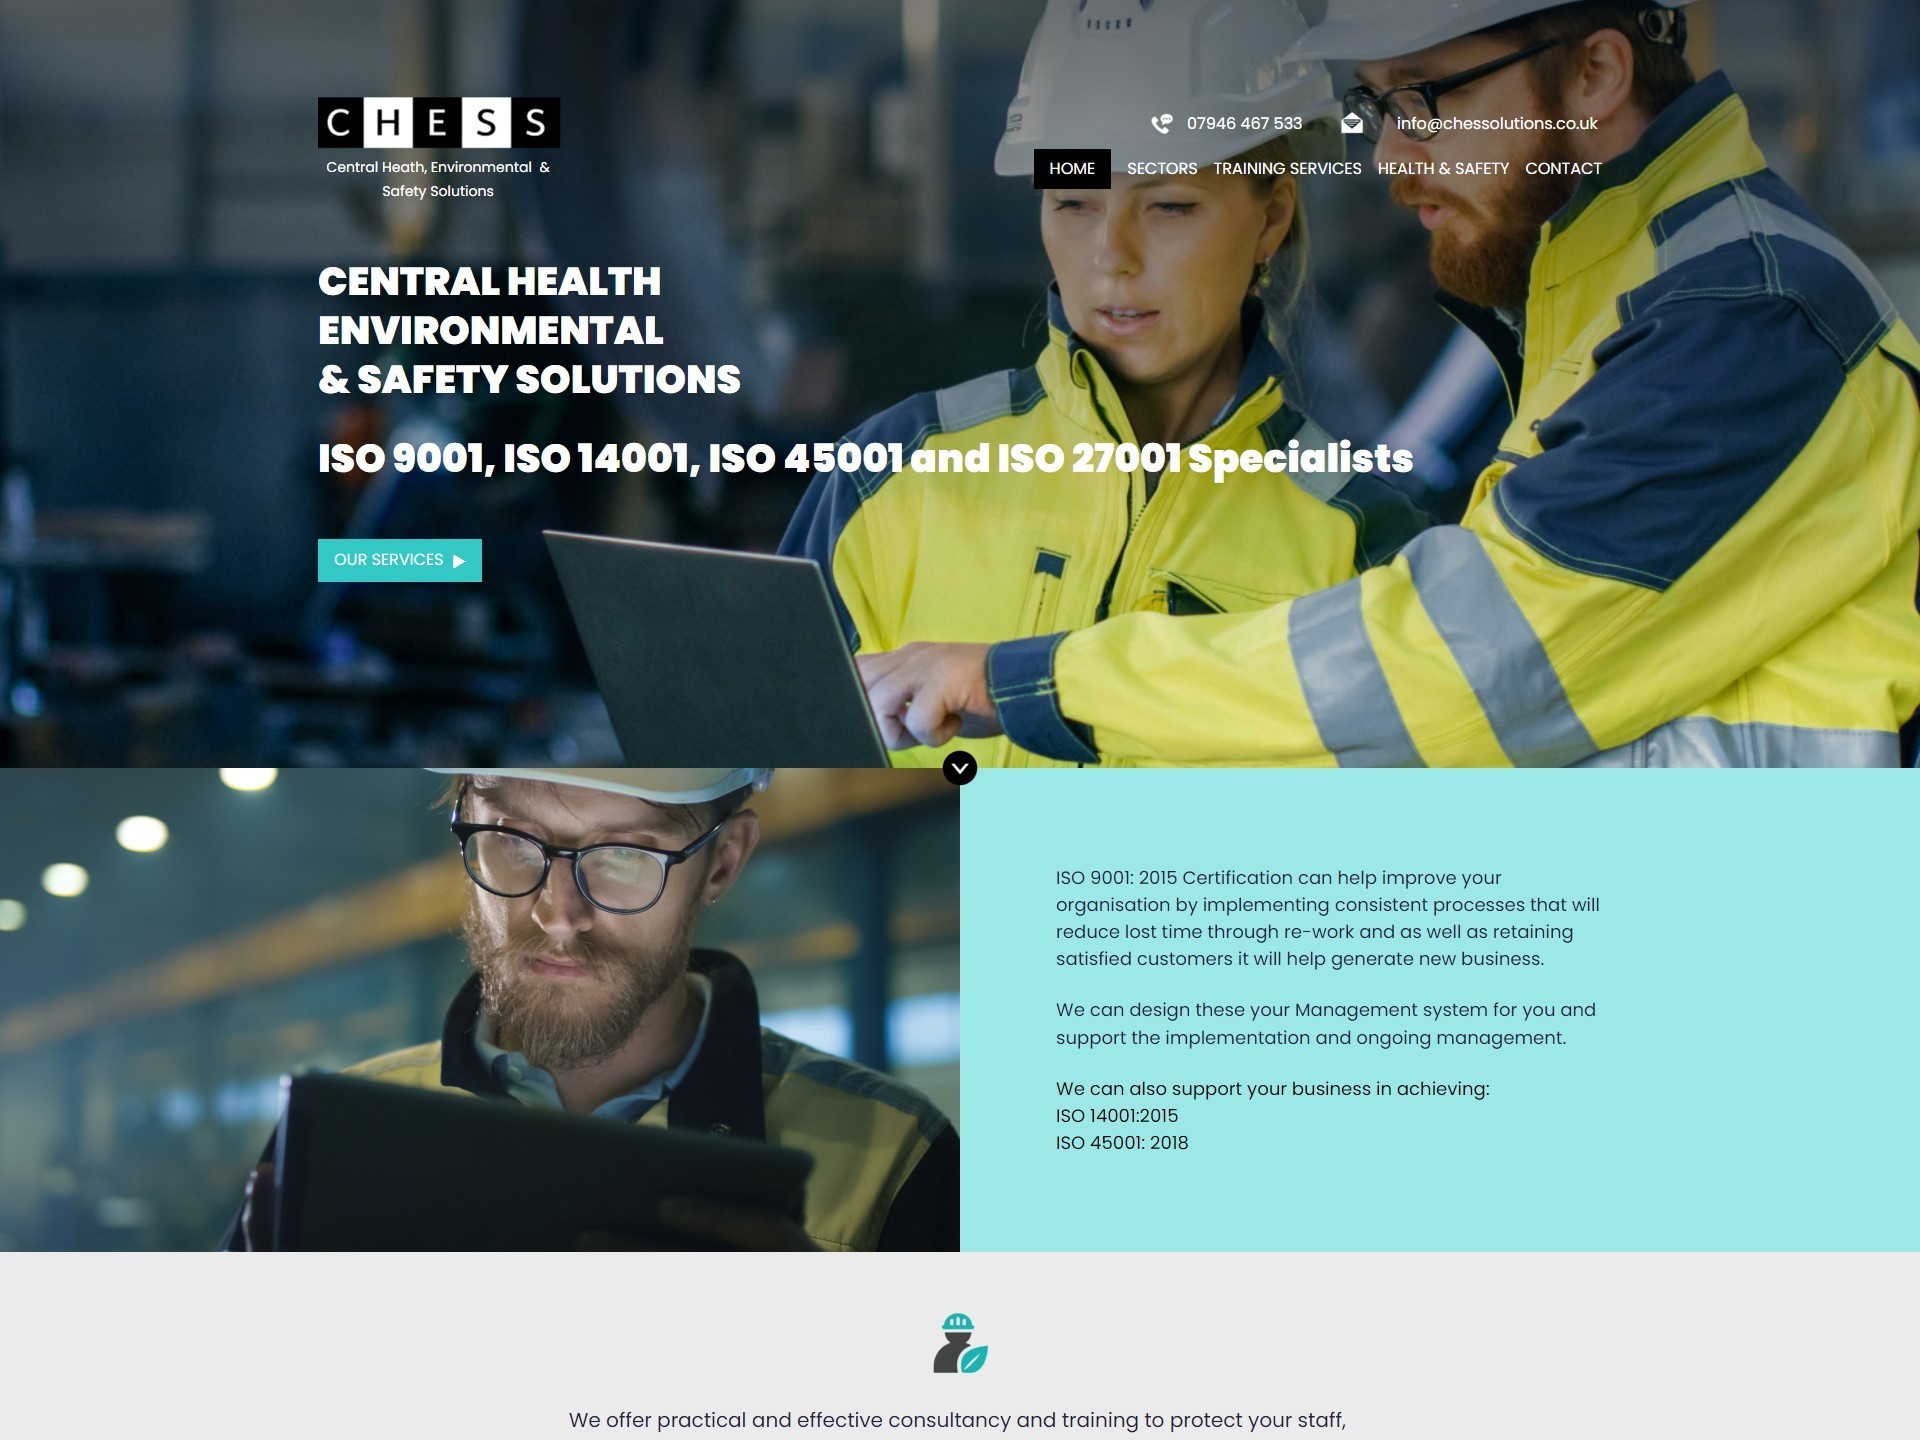 Central Health Environmental & Safety Solutions website